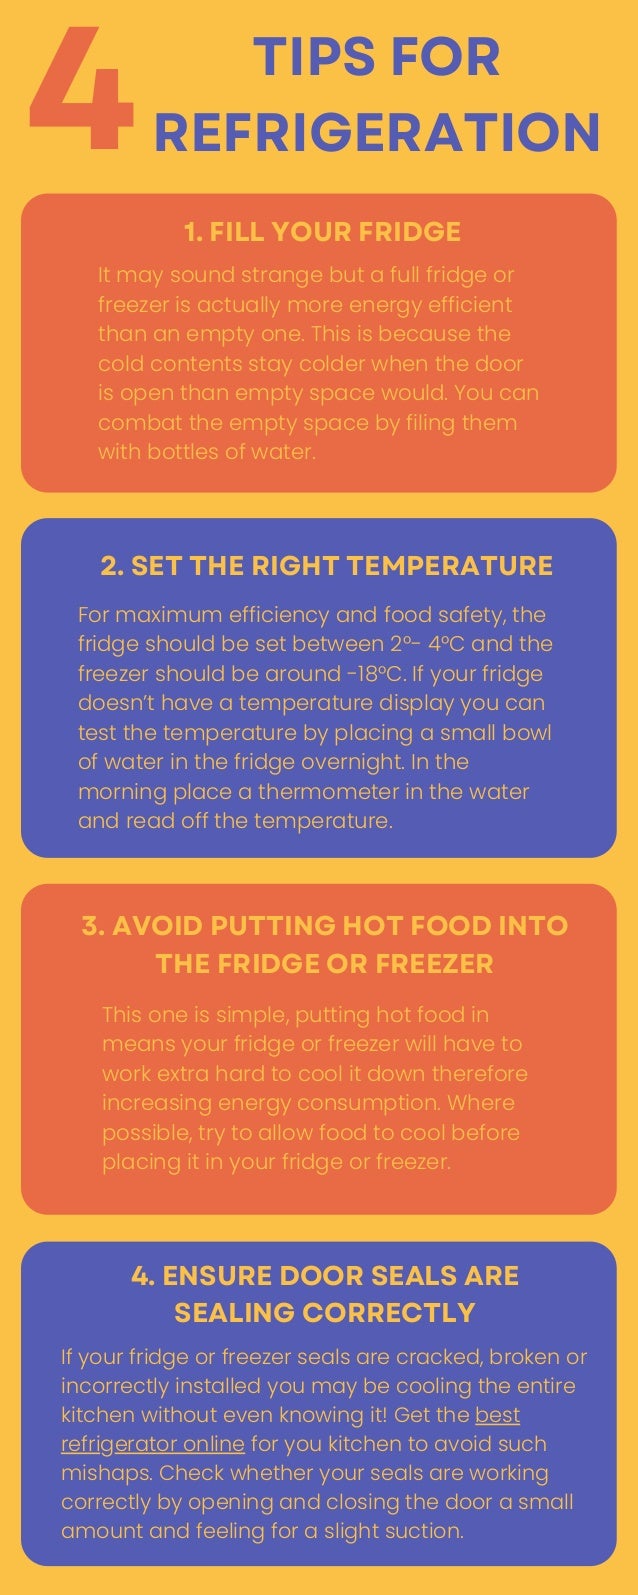 It may sound strange but a full fridge or
freezer is actually more energy efficient
than an empty one. This is because the
cold contents stay colder when the door
is open than empty space would. You can
combat the empty space by filing them
with bottles of water.
1. FILL YOUR FRIDGE
TIPS FOR
REFRIGERATION


4
For maximum efficiency and food safety, the
fridge should be set between 2°- 4°C and the
freezer should be around -18°C. If your fridge
doesn’t have a temperature display you can
test the temperature by placing a small bowl
of water in the fridge overnight. In the
morning place a thermometer in the water
and read off the temperature.
2. SET THE RIGHT TEMPERATURE
This one is simple, putting hot food in
means your fridge or freezer will have to
work extra hard to cool it down therefore
increasing energy consumption. Where
possible, try to allow food to cool before
placing it in your fridge or freezer.
3. AVOID PUTTING HOT FOOD INTO
THE FRIDGE OR FREEZER
If your fridge or freezer seals are cracked, broken or
incorrectly installed you may be cooling the entire
kitchen without even knowing it! Get the best
refrigerator online for you kitchen to avoid such
mishaps. Check whether your seals are working
correctly by opening and closing the door a small
amount and feeling for a slight suction.
4. ENSURE DOOR SEALS ARE
SEALING CORRECTLY
 